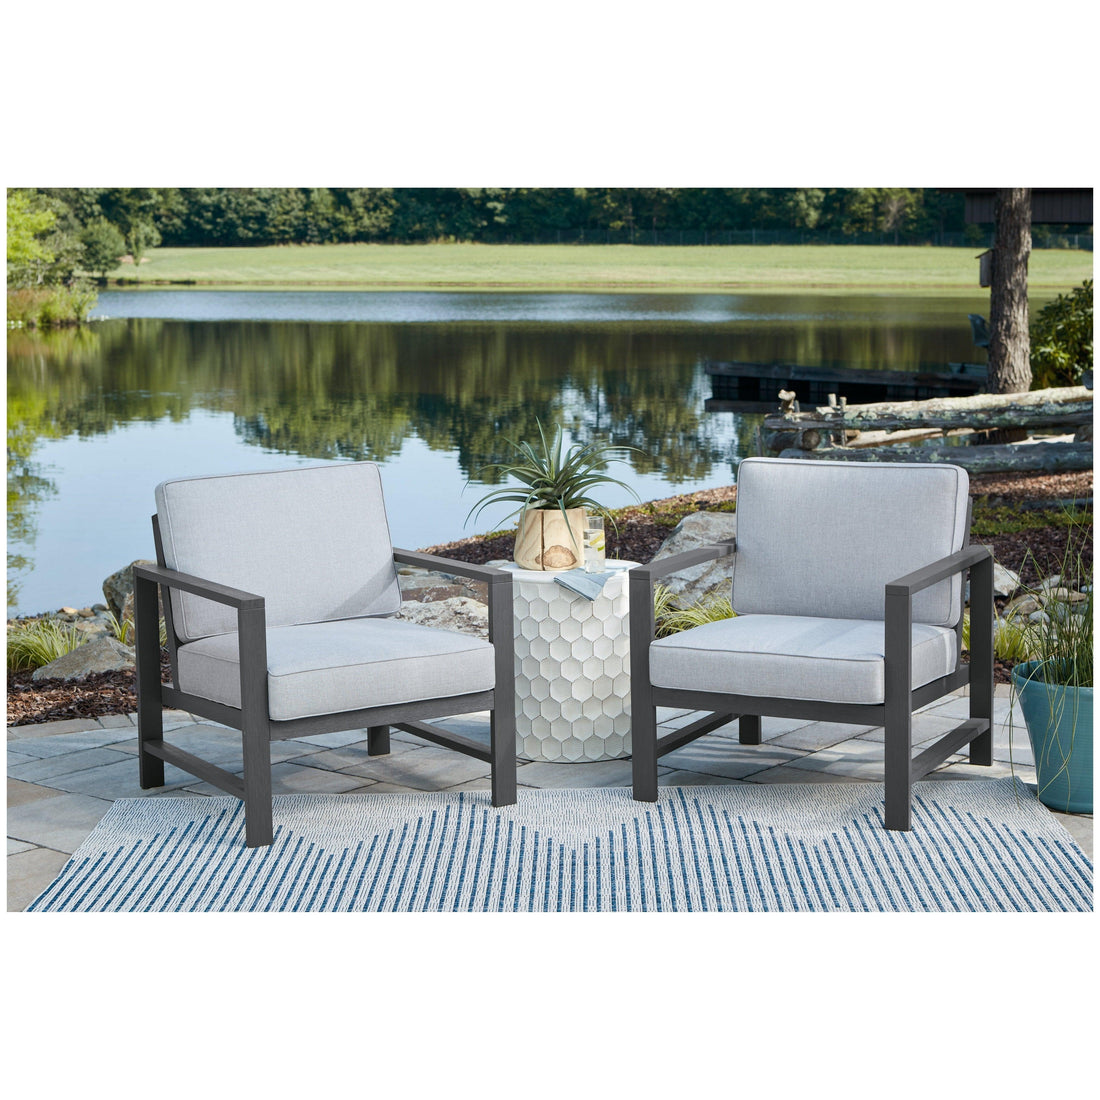 Fynnegan Lounge Chair with Cushion (Set of 2) Ash-P349-821